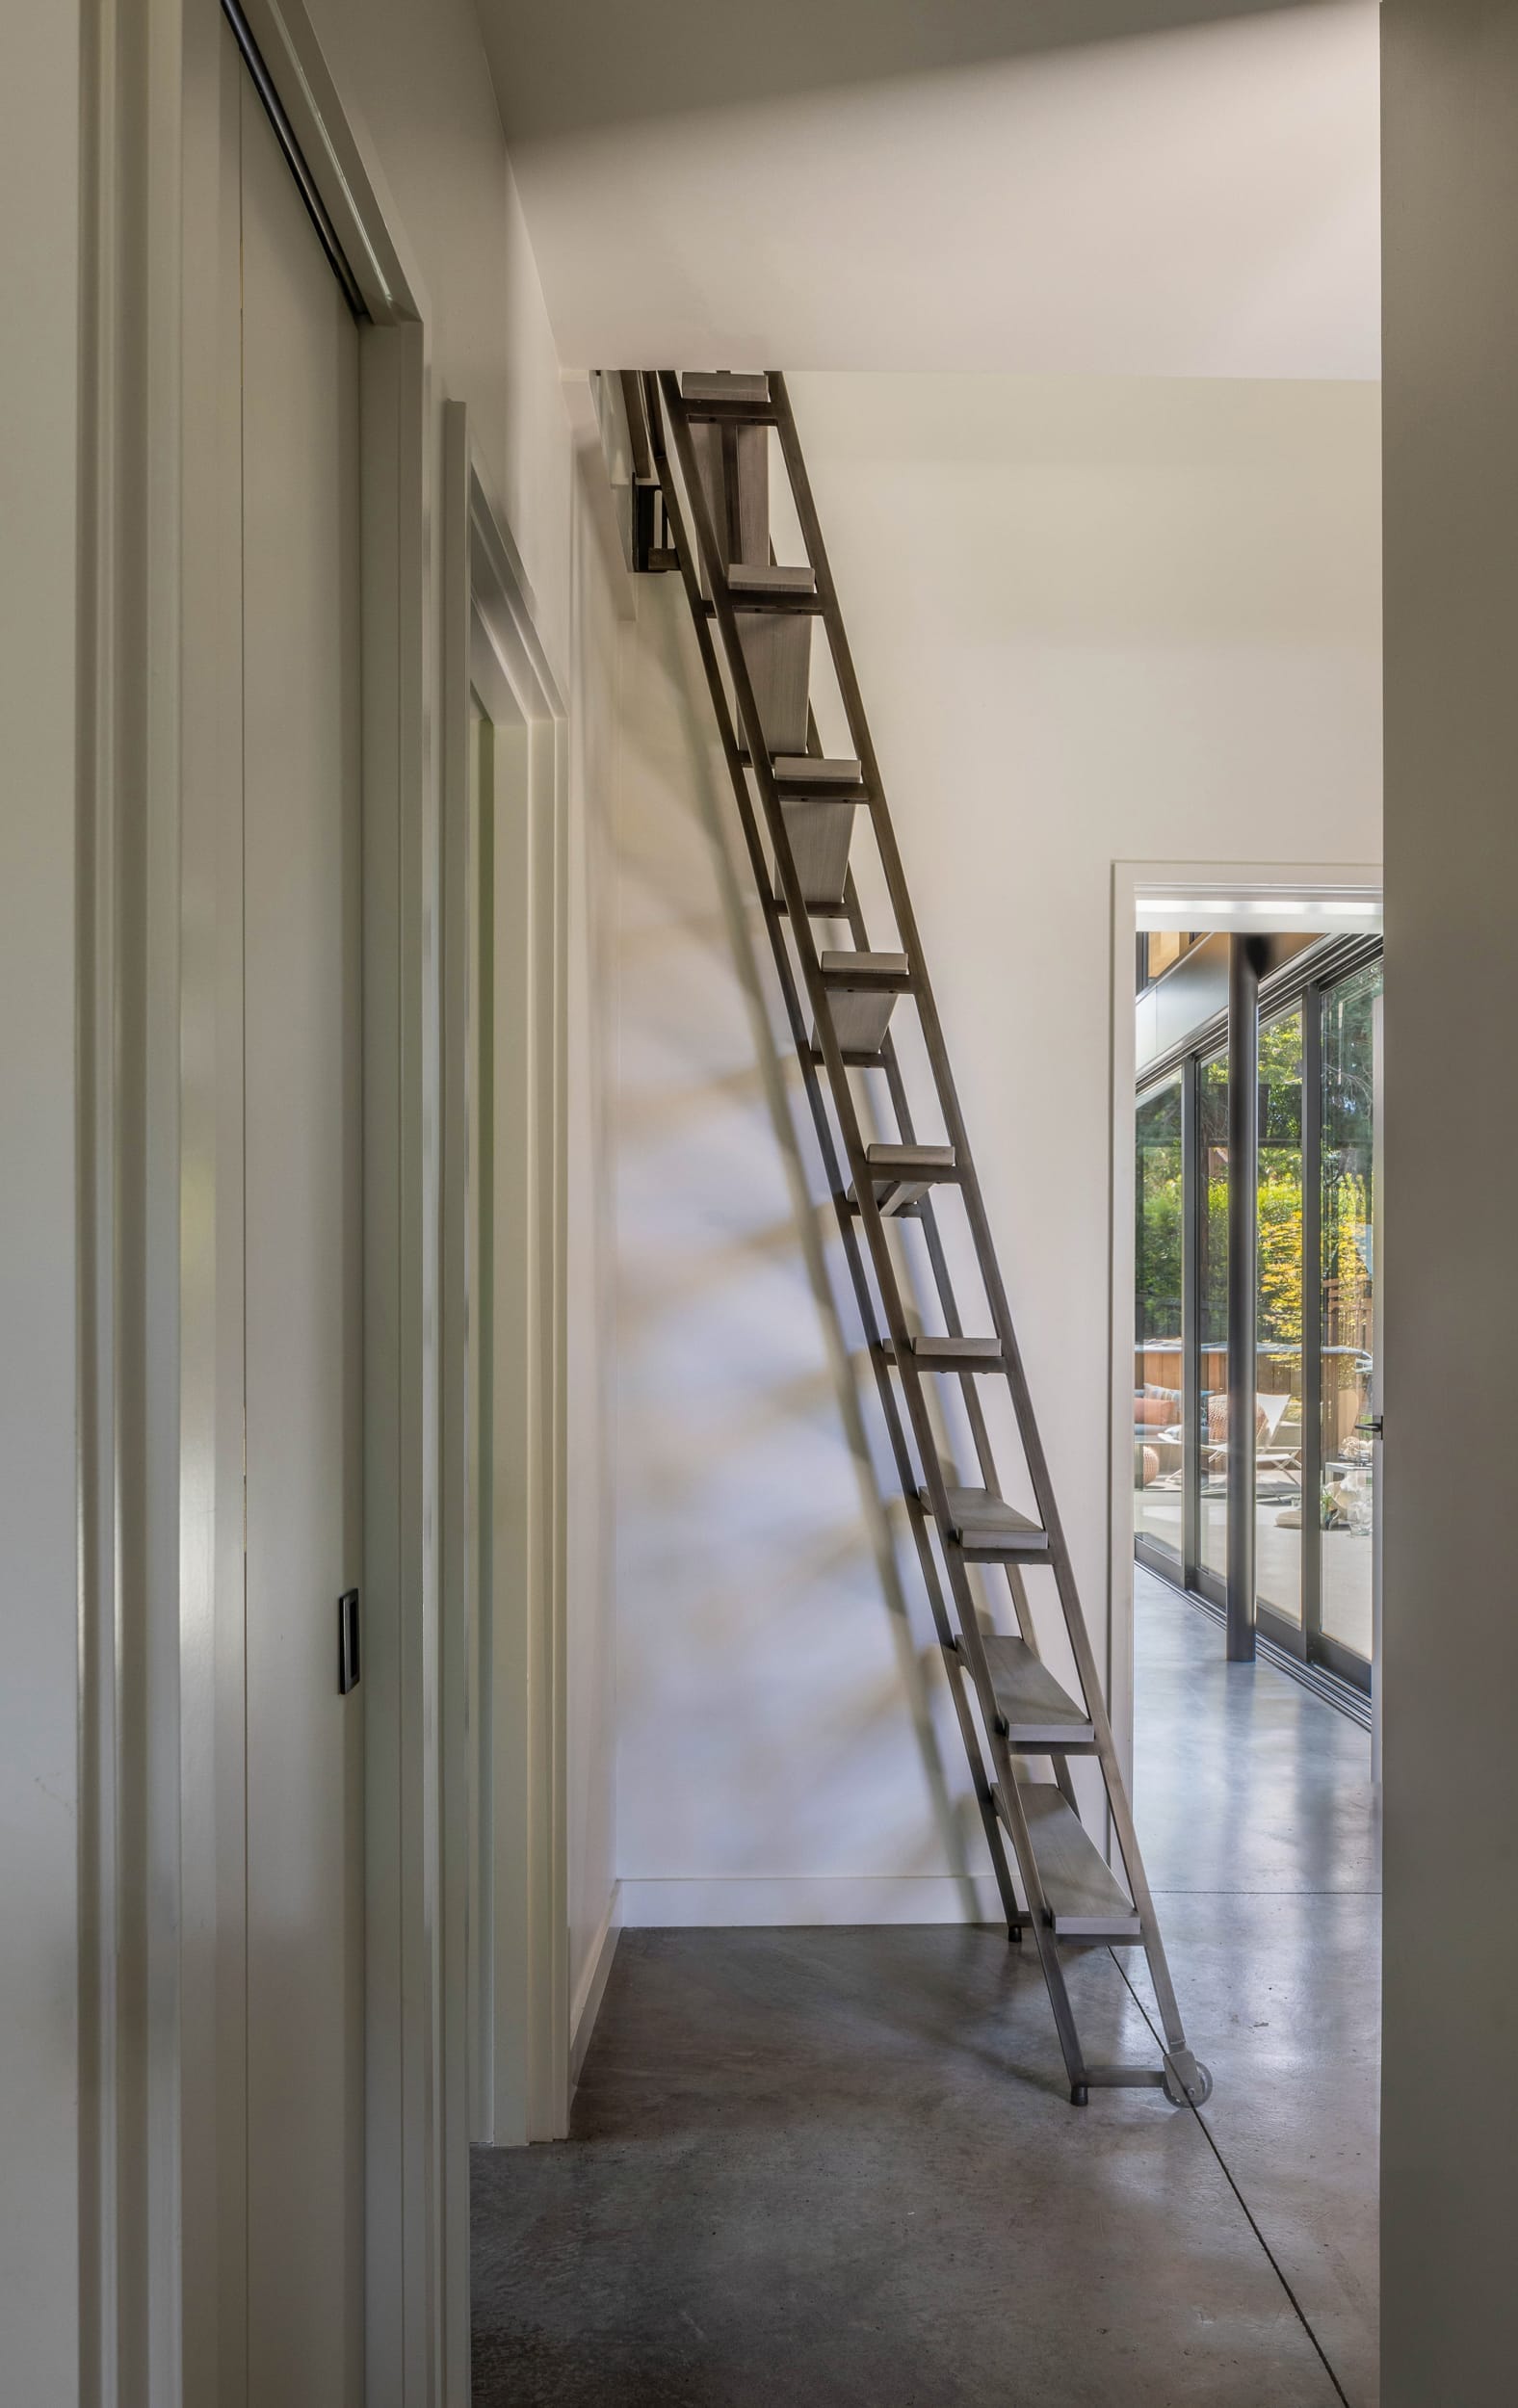 A modern home with a ladder leading up to a door.